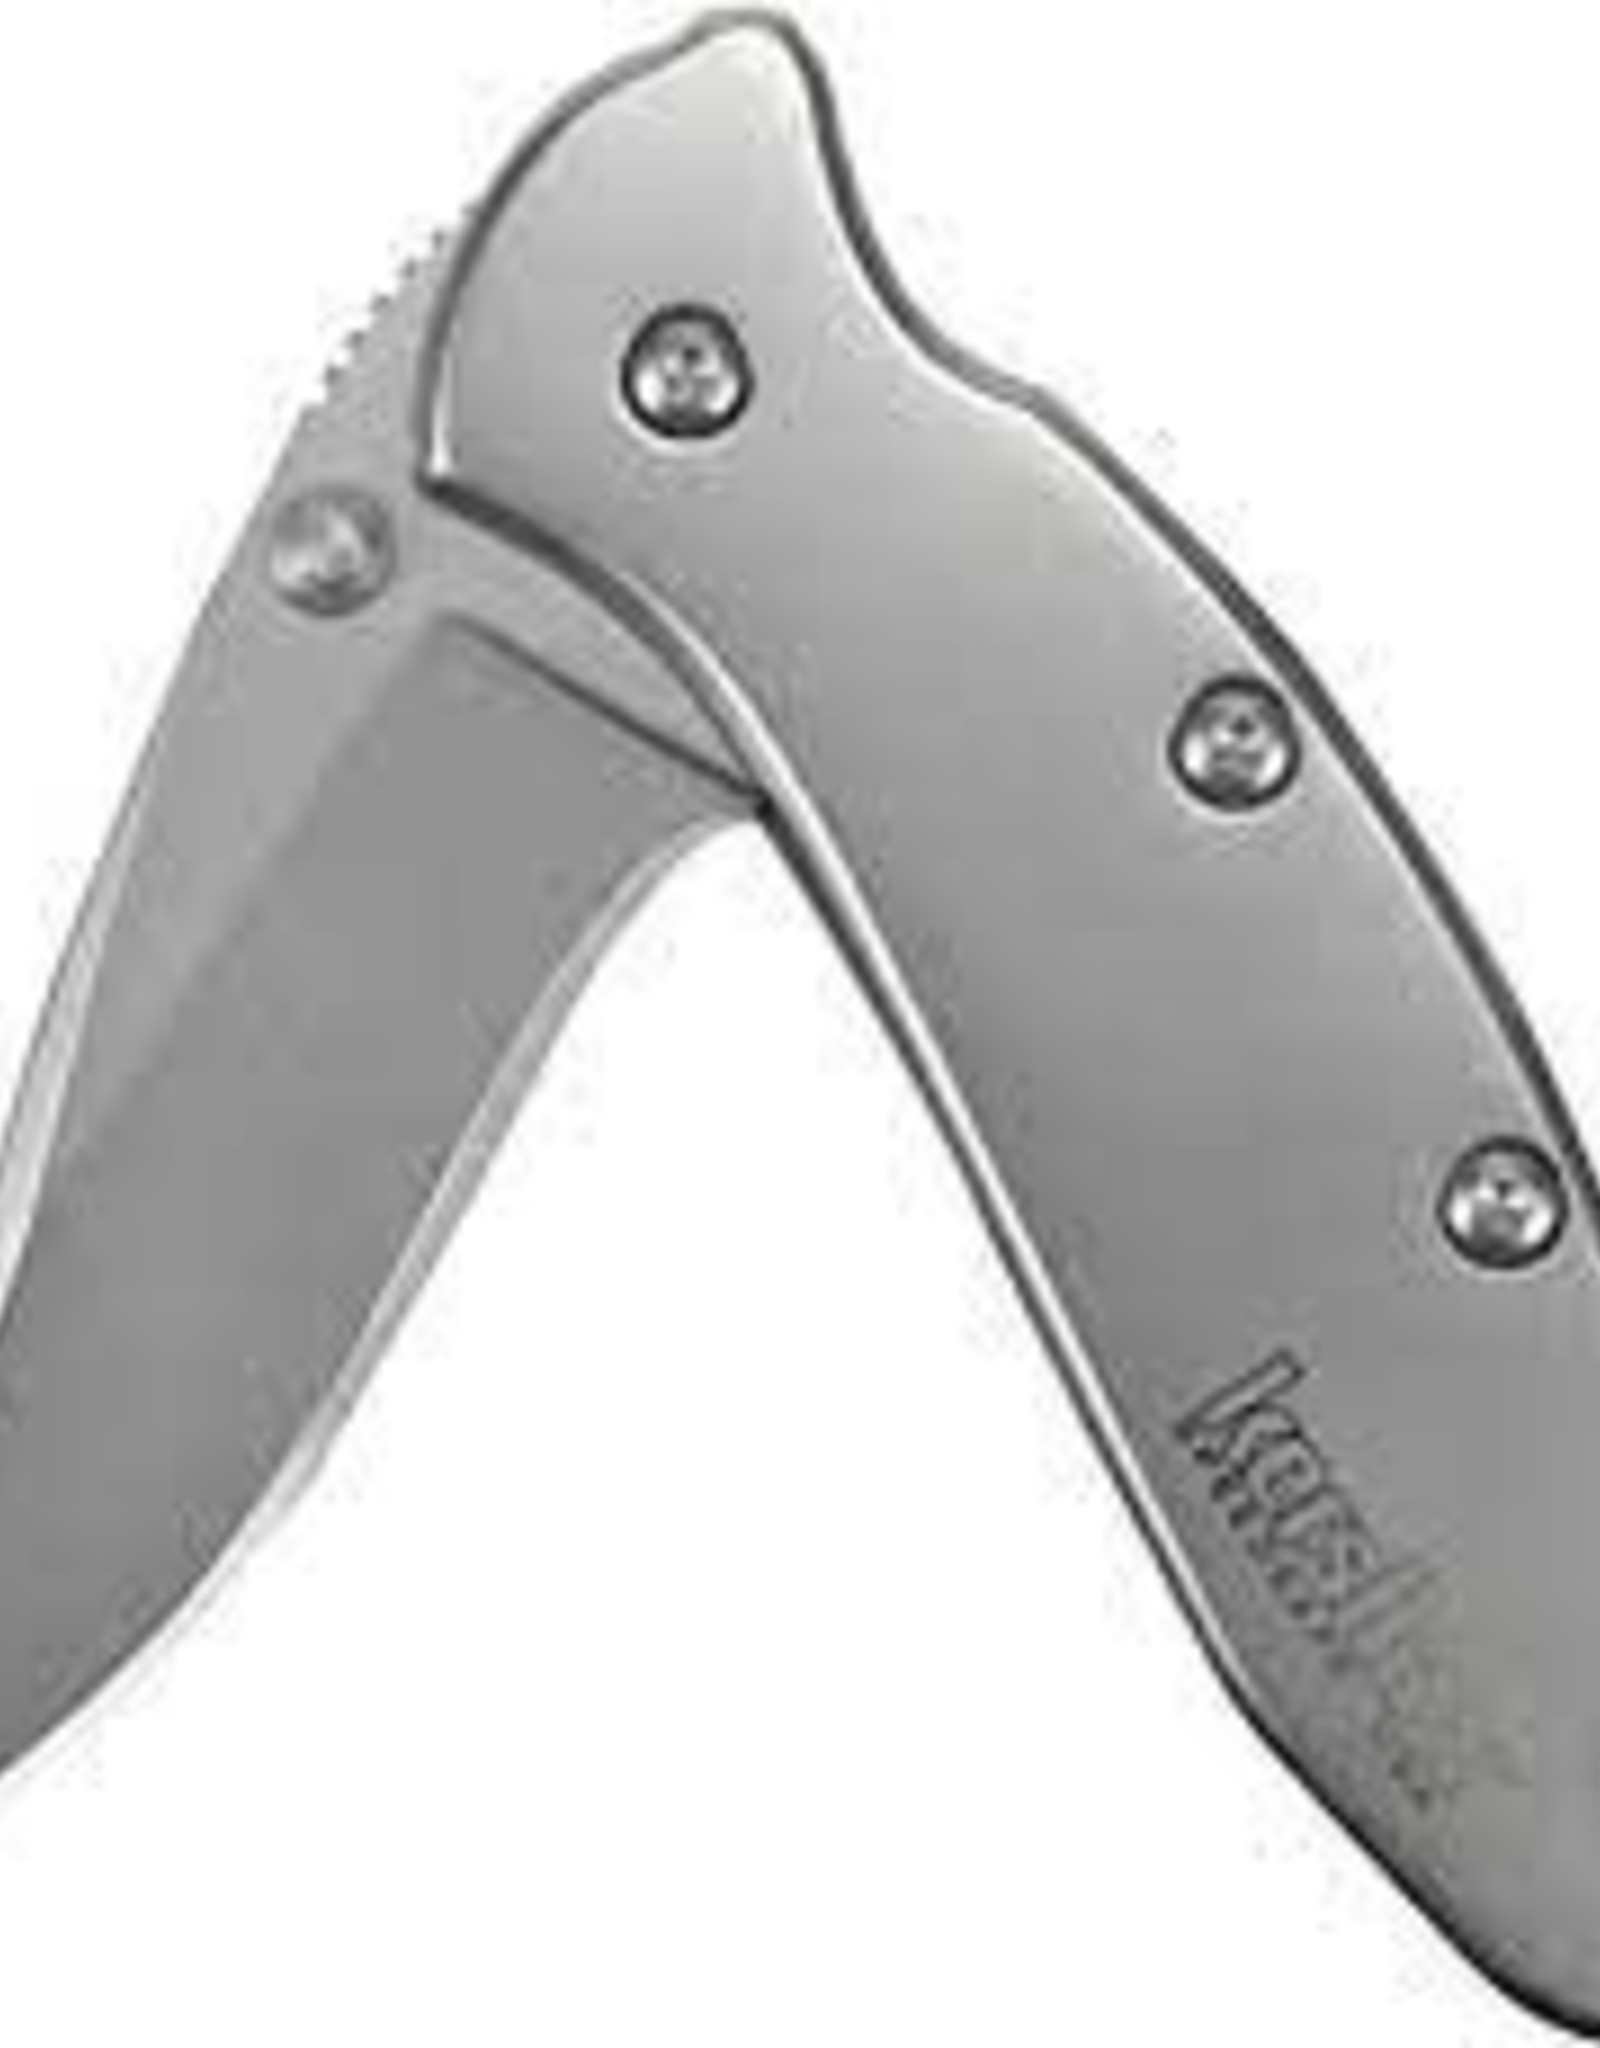 Kershaw Chive Knife